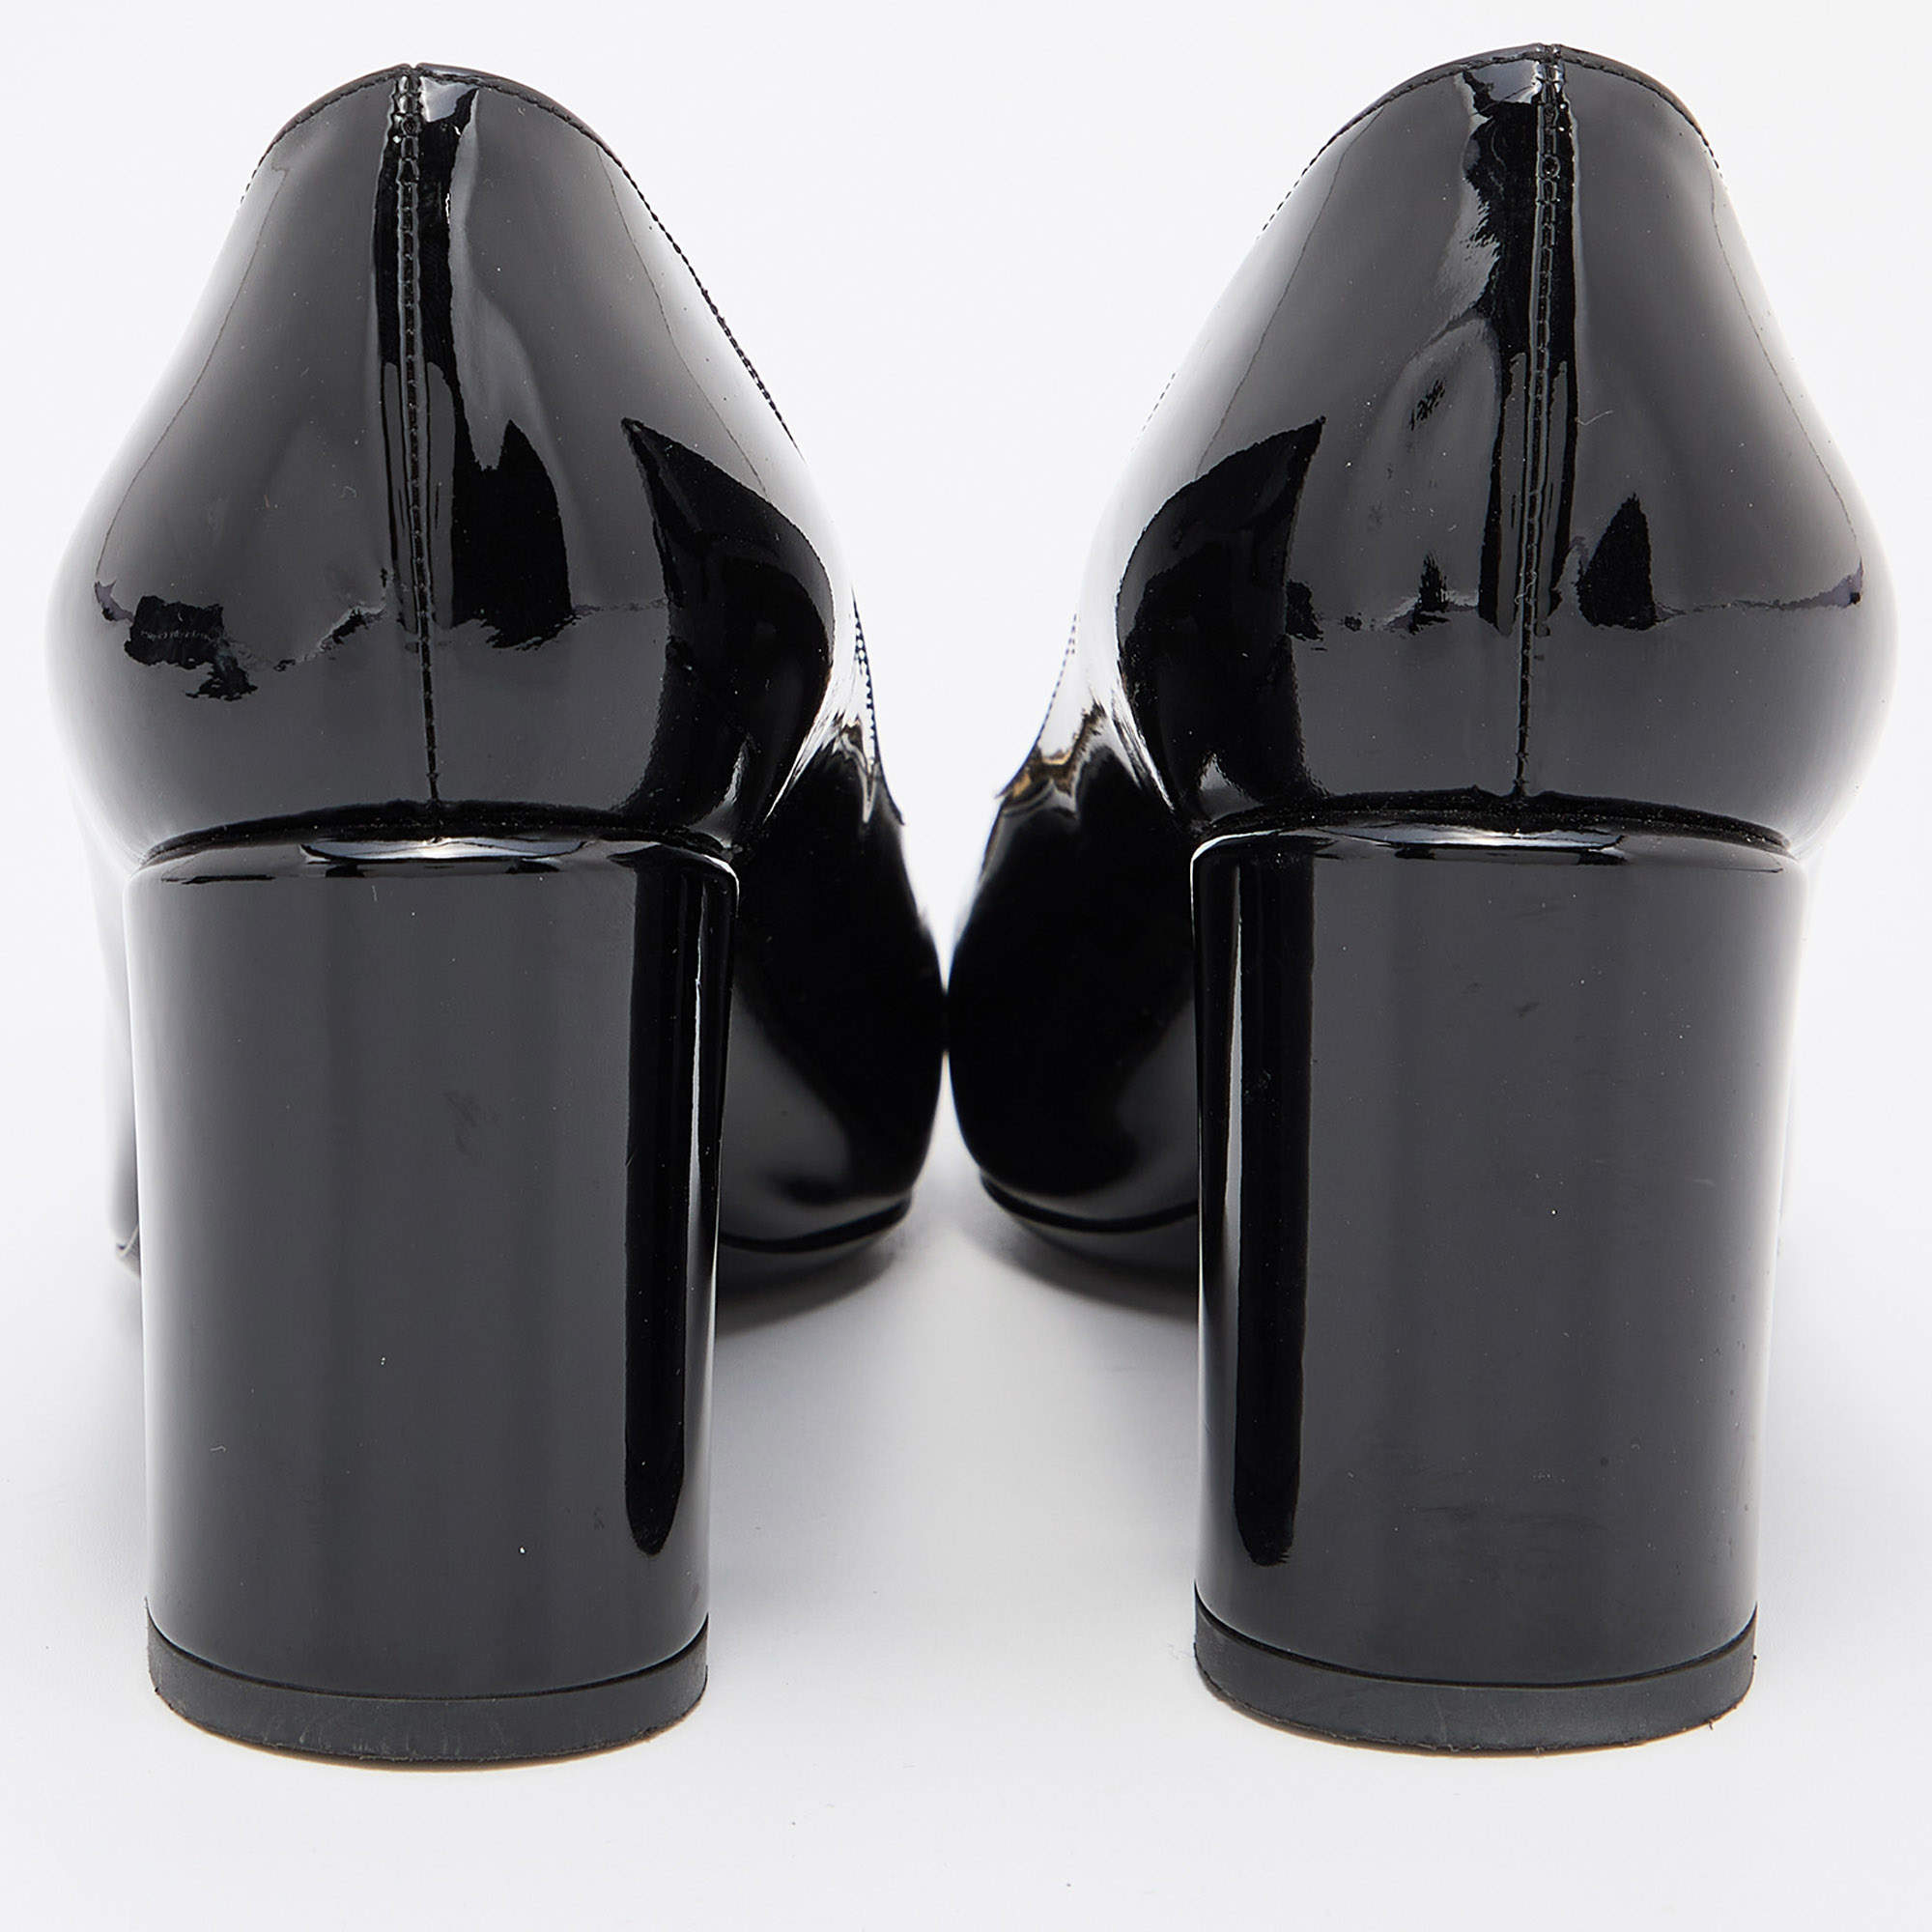 Madeleine patent leather heels Louis Vuitton Black size 40 EU in Patent  leather - 31645570